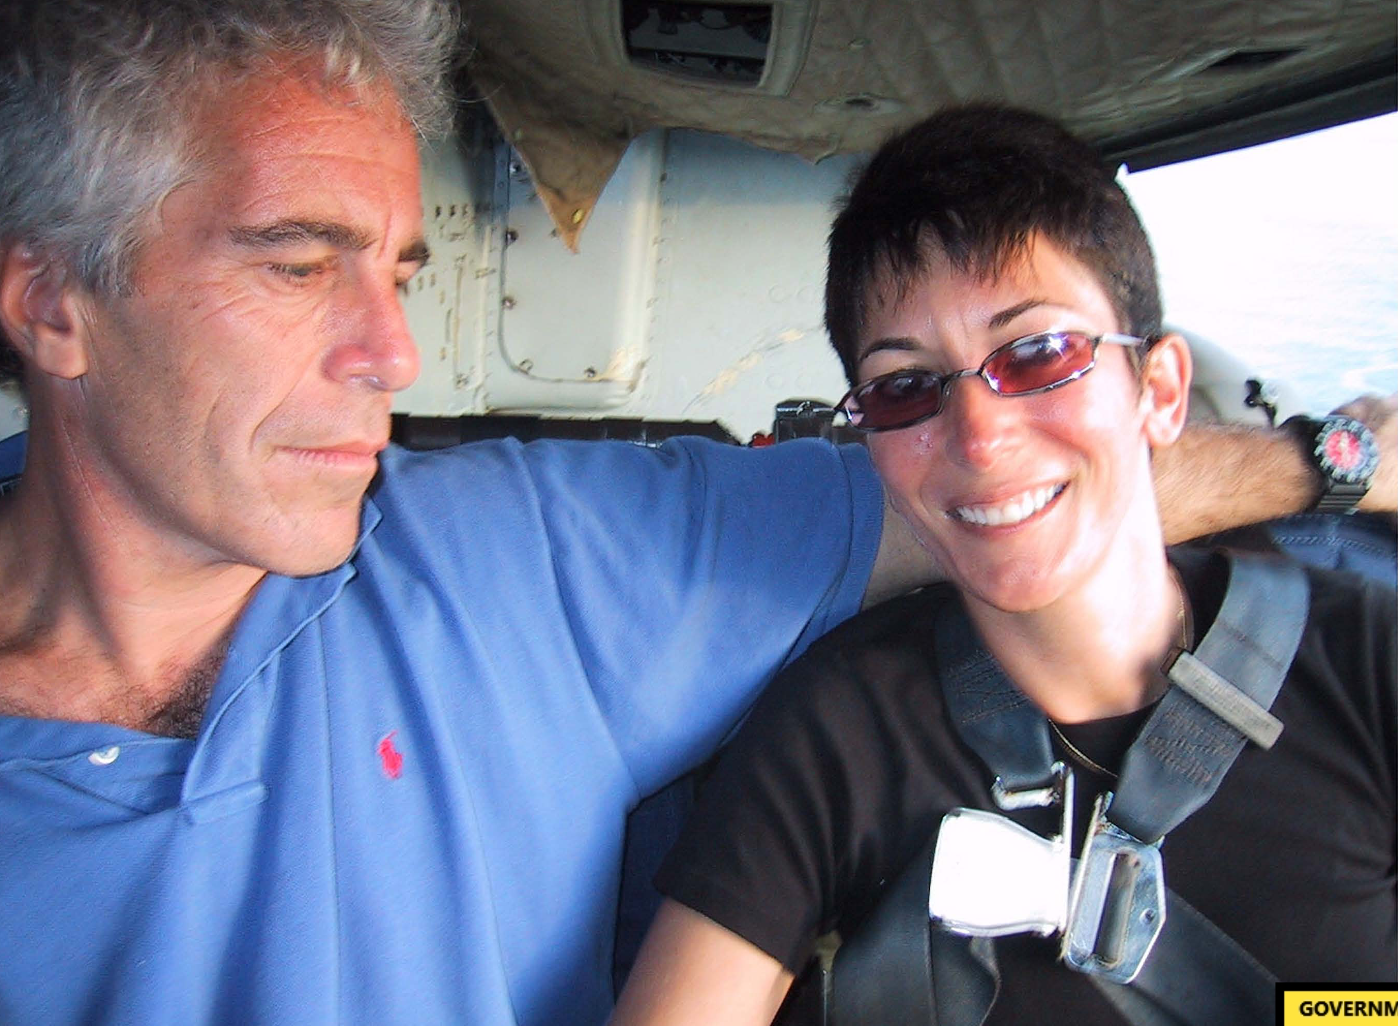 An undated photo of Epstein with Ms Maxwell on a plane